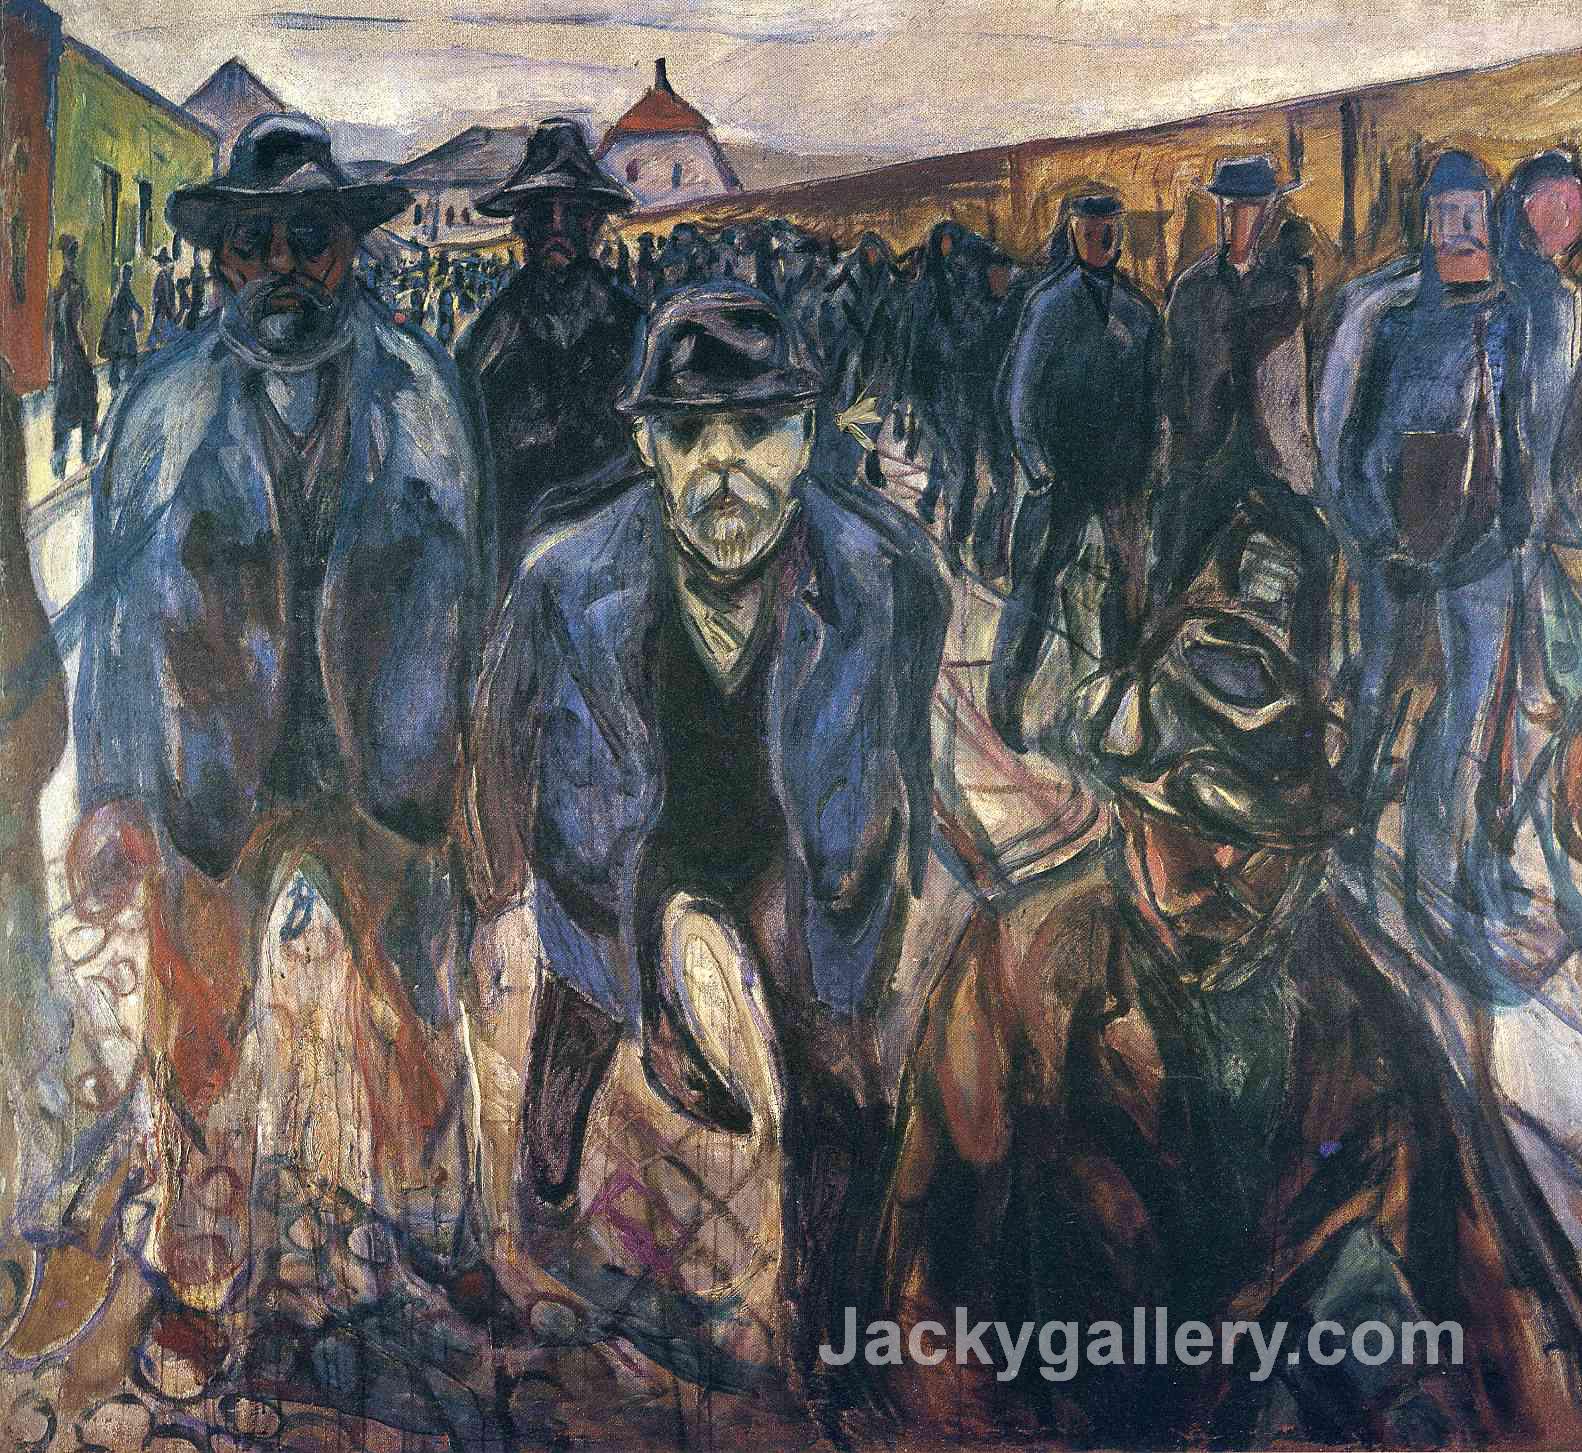 Workers on Their Way Home by Edvard Munch paintings reproduction